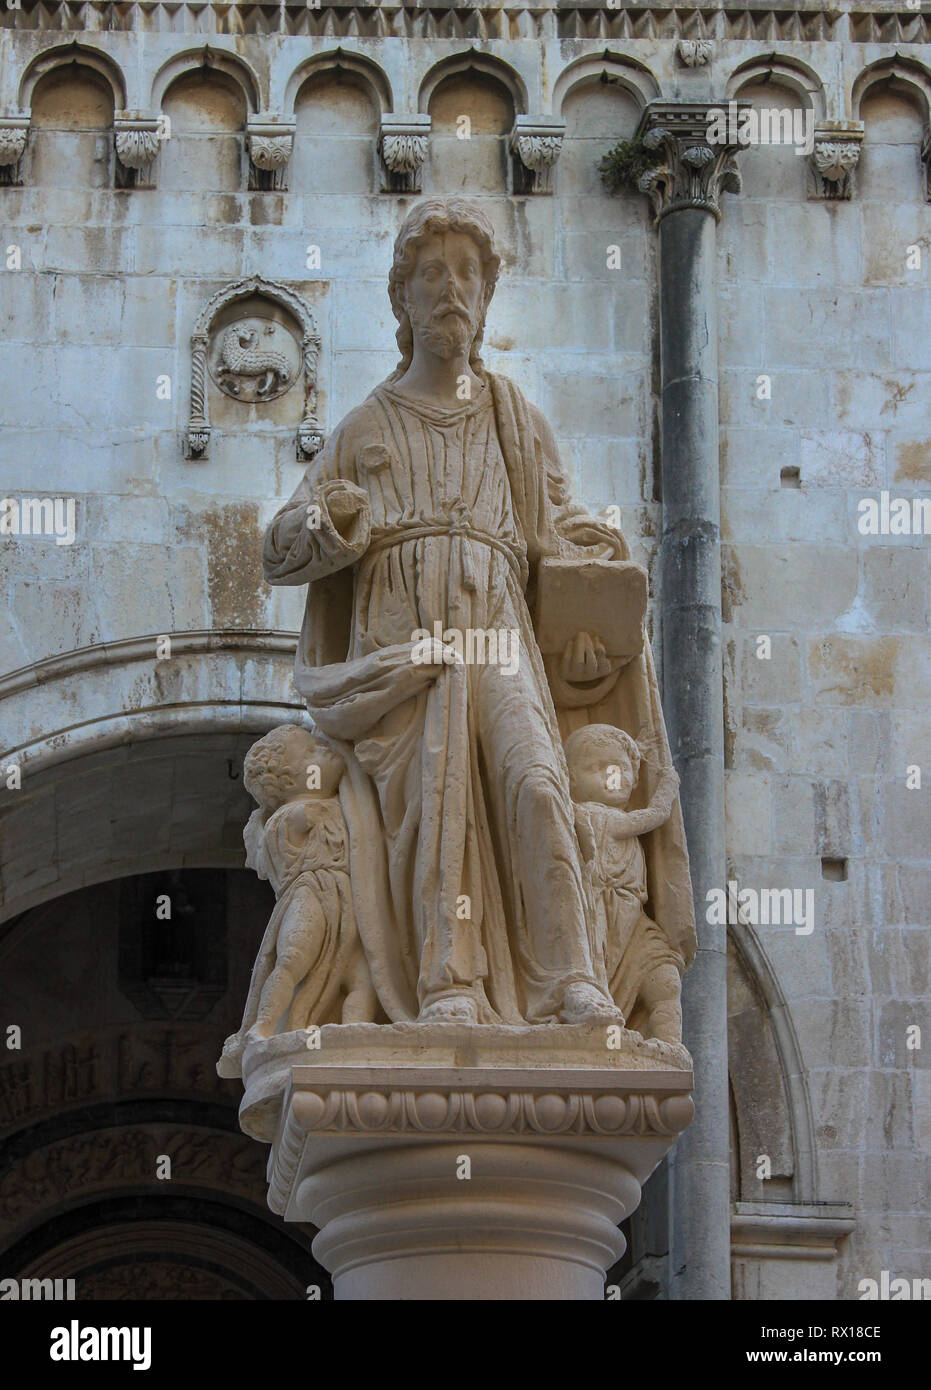 Statue of St Lawrence in front of the entrance to the Cathedral, Trogir, Dalmatia, Croatia Stock Photo